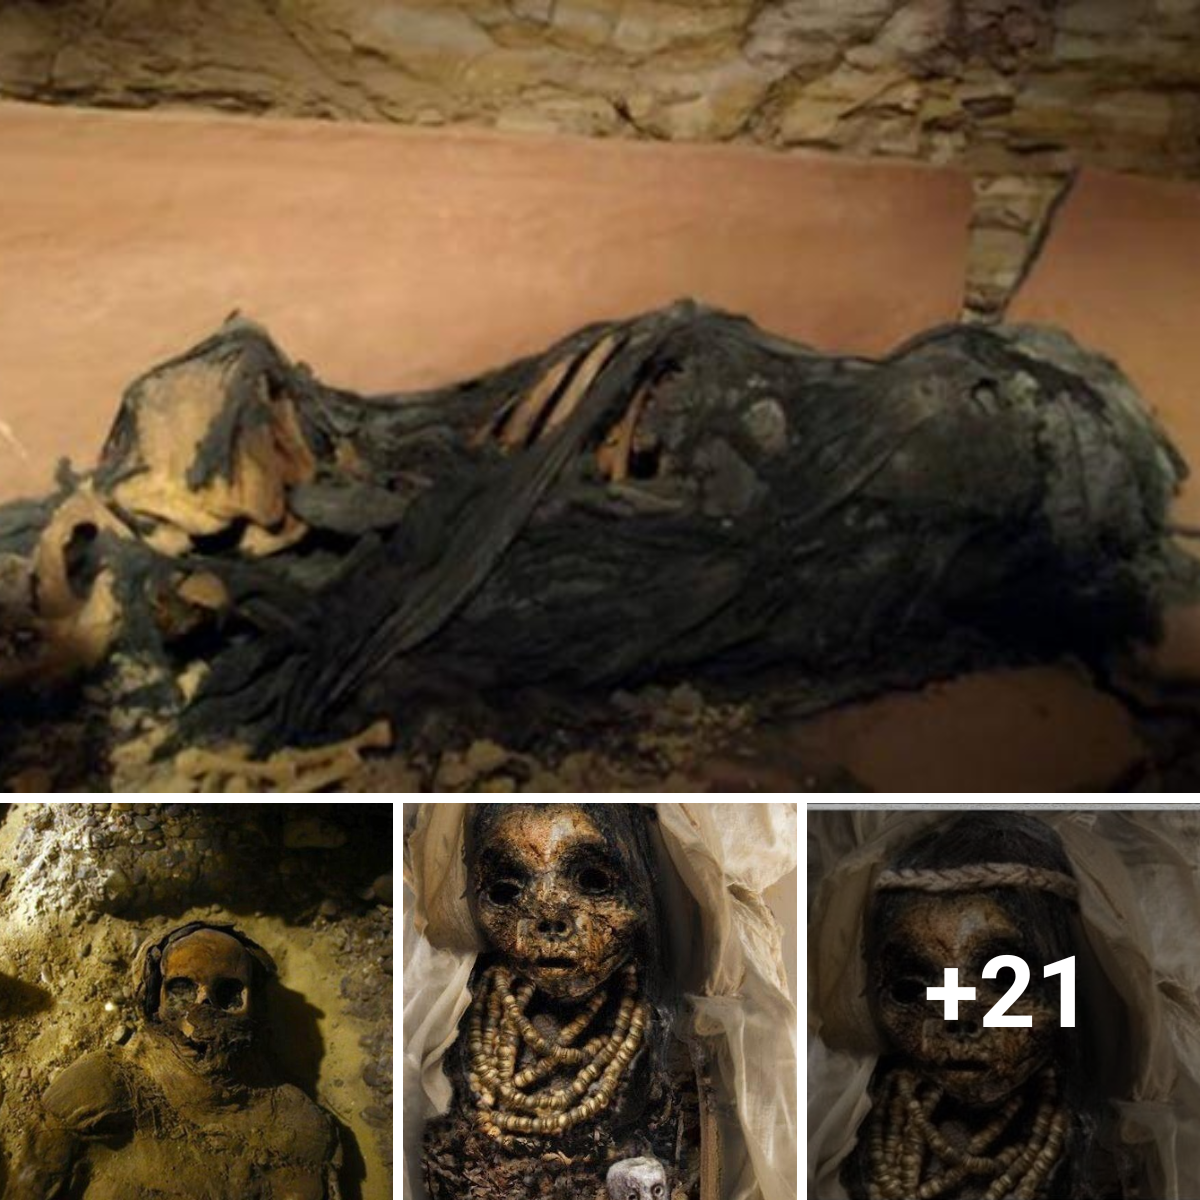 In an expert-led discovery, desert archaeologists unearth a mysterious 4,000-year-old mummy and funerary chamber.